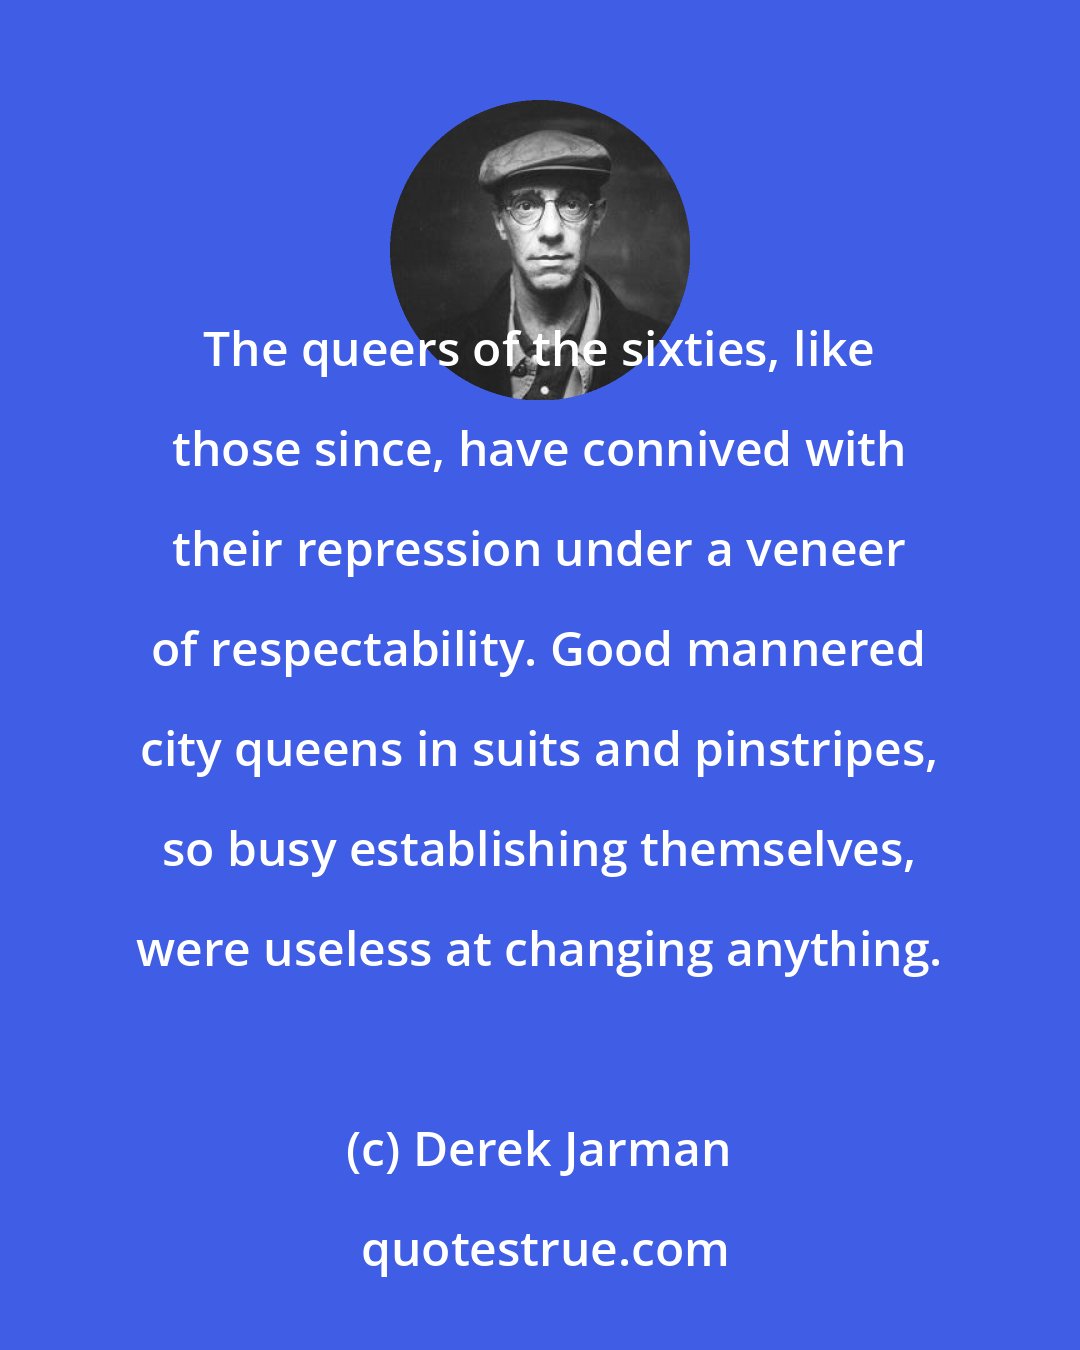 Derek Jarman: The queers of the sixties, like those since, have connived with their repression under a veneer of respectability. Good mannered city queens in suits and pinstripes, so busy establishing themselves, were useless at changing anything.